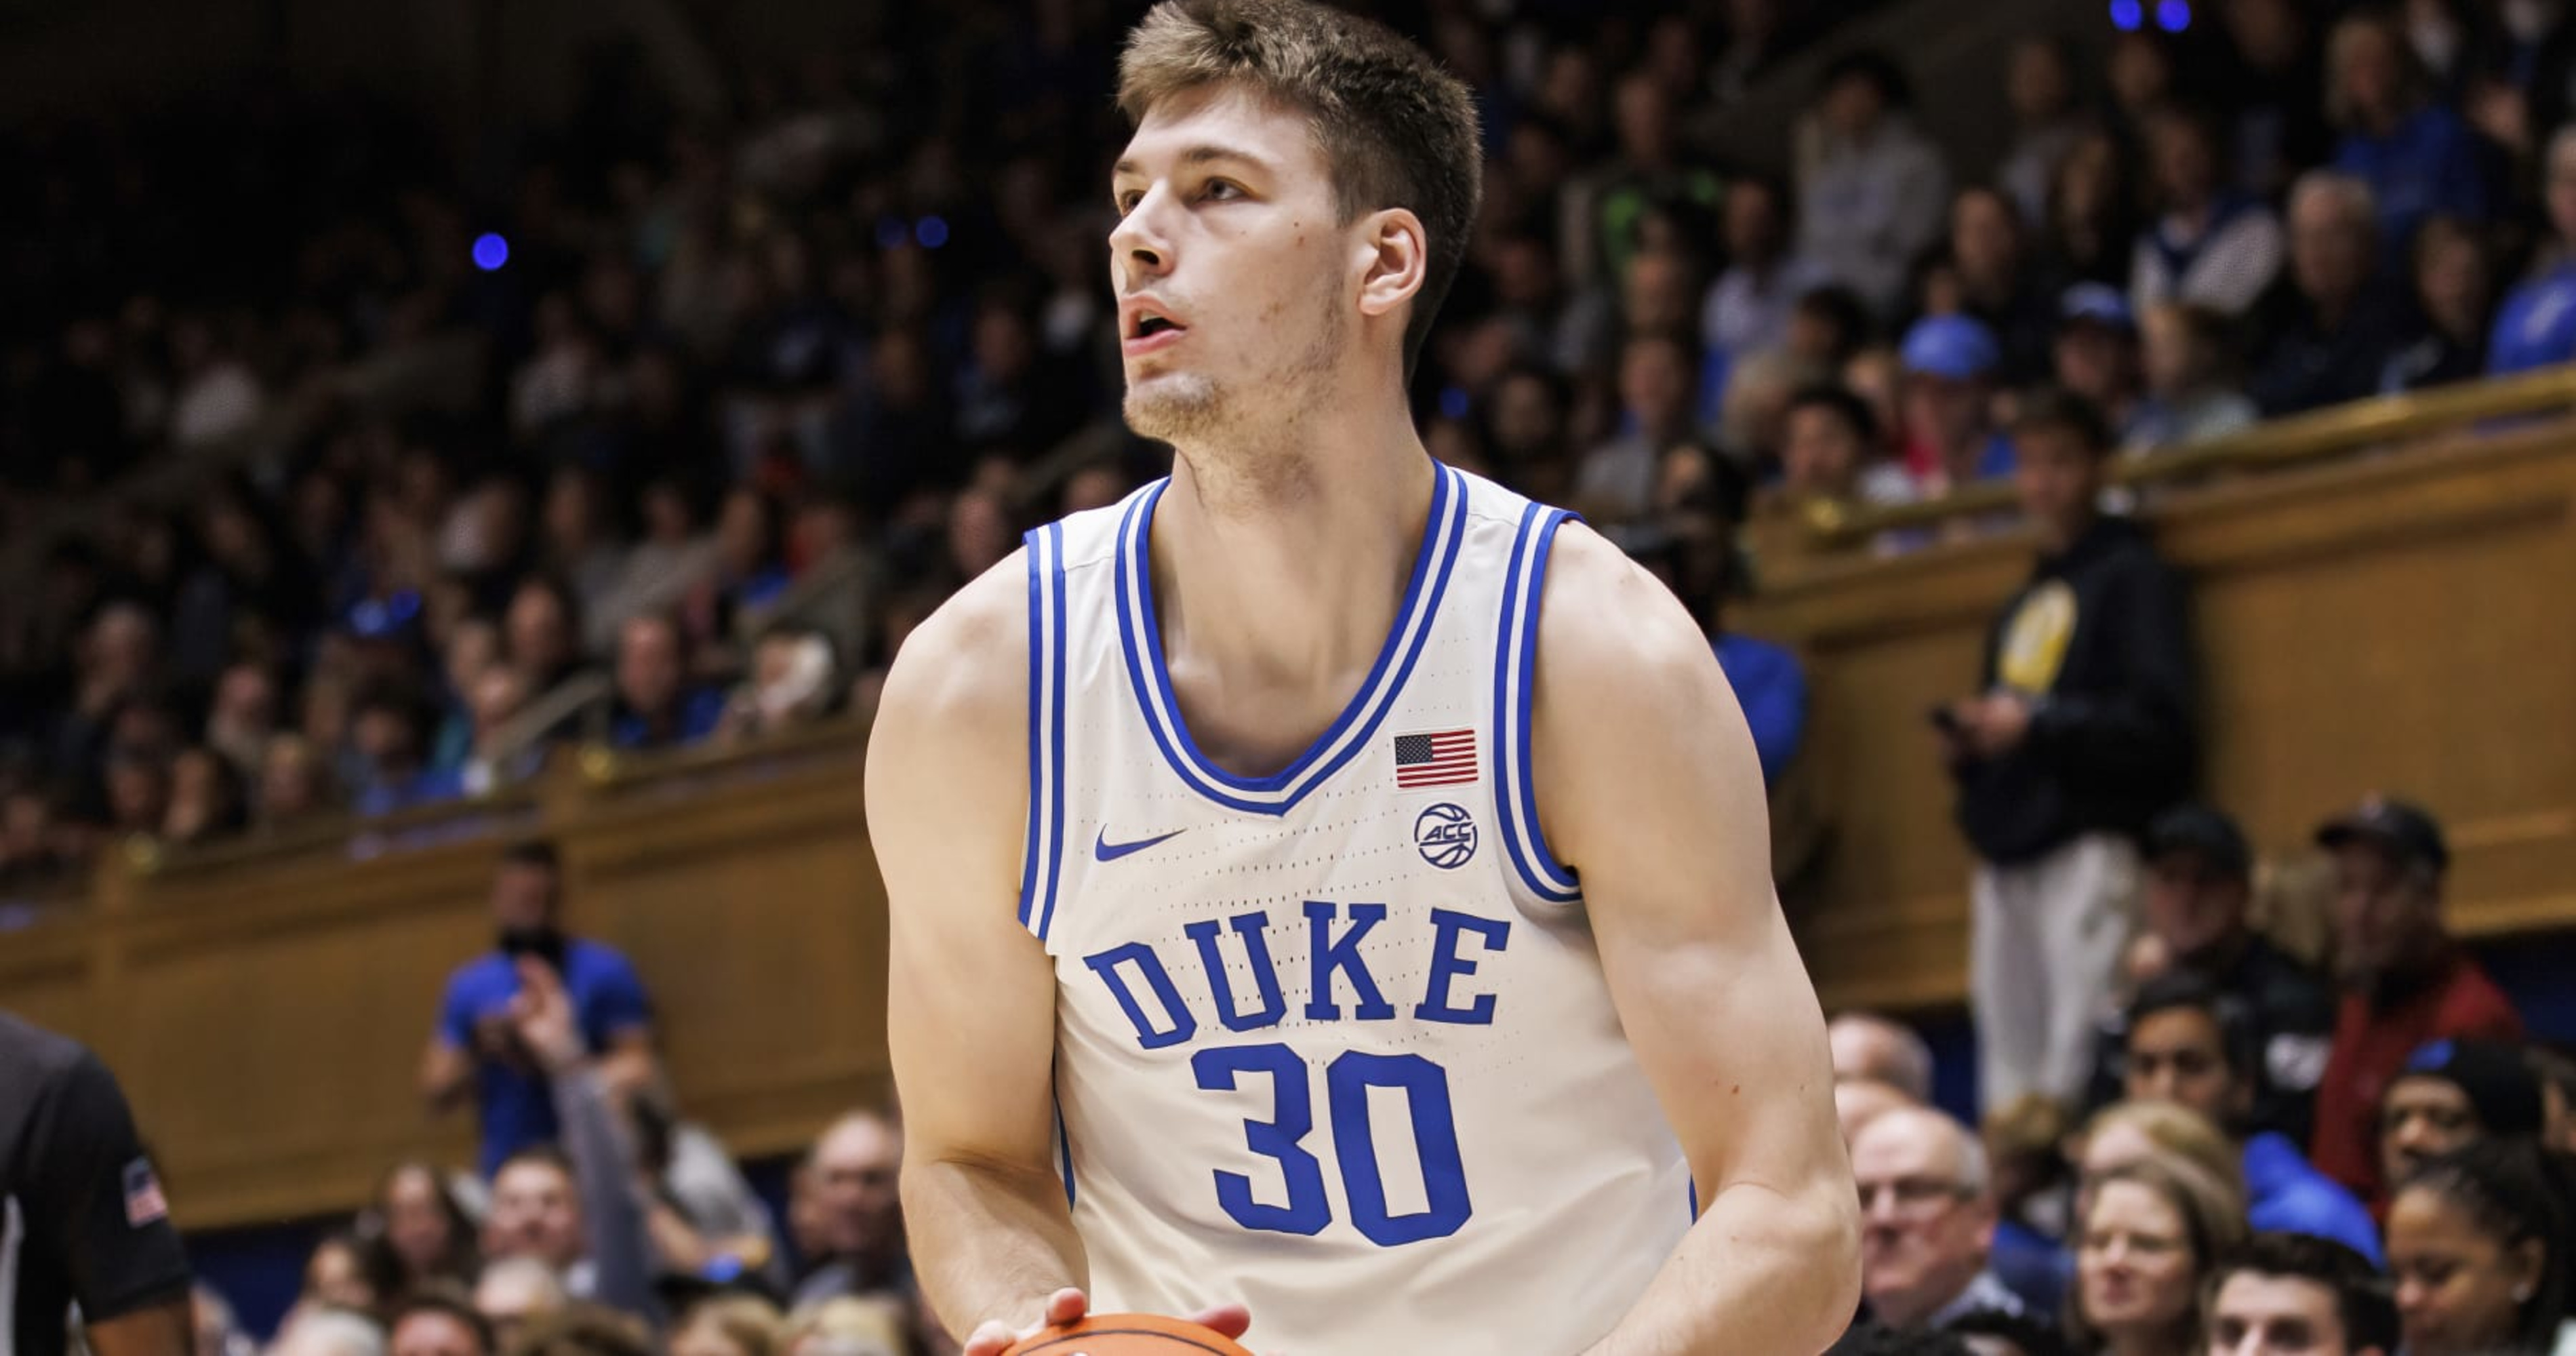 BEST SHOOTERS in College Basketball for 23-24